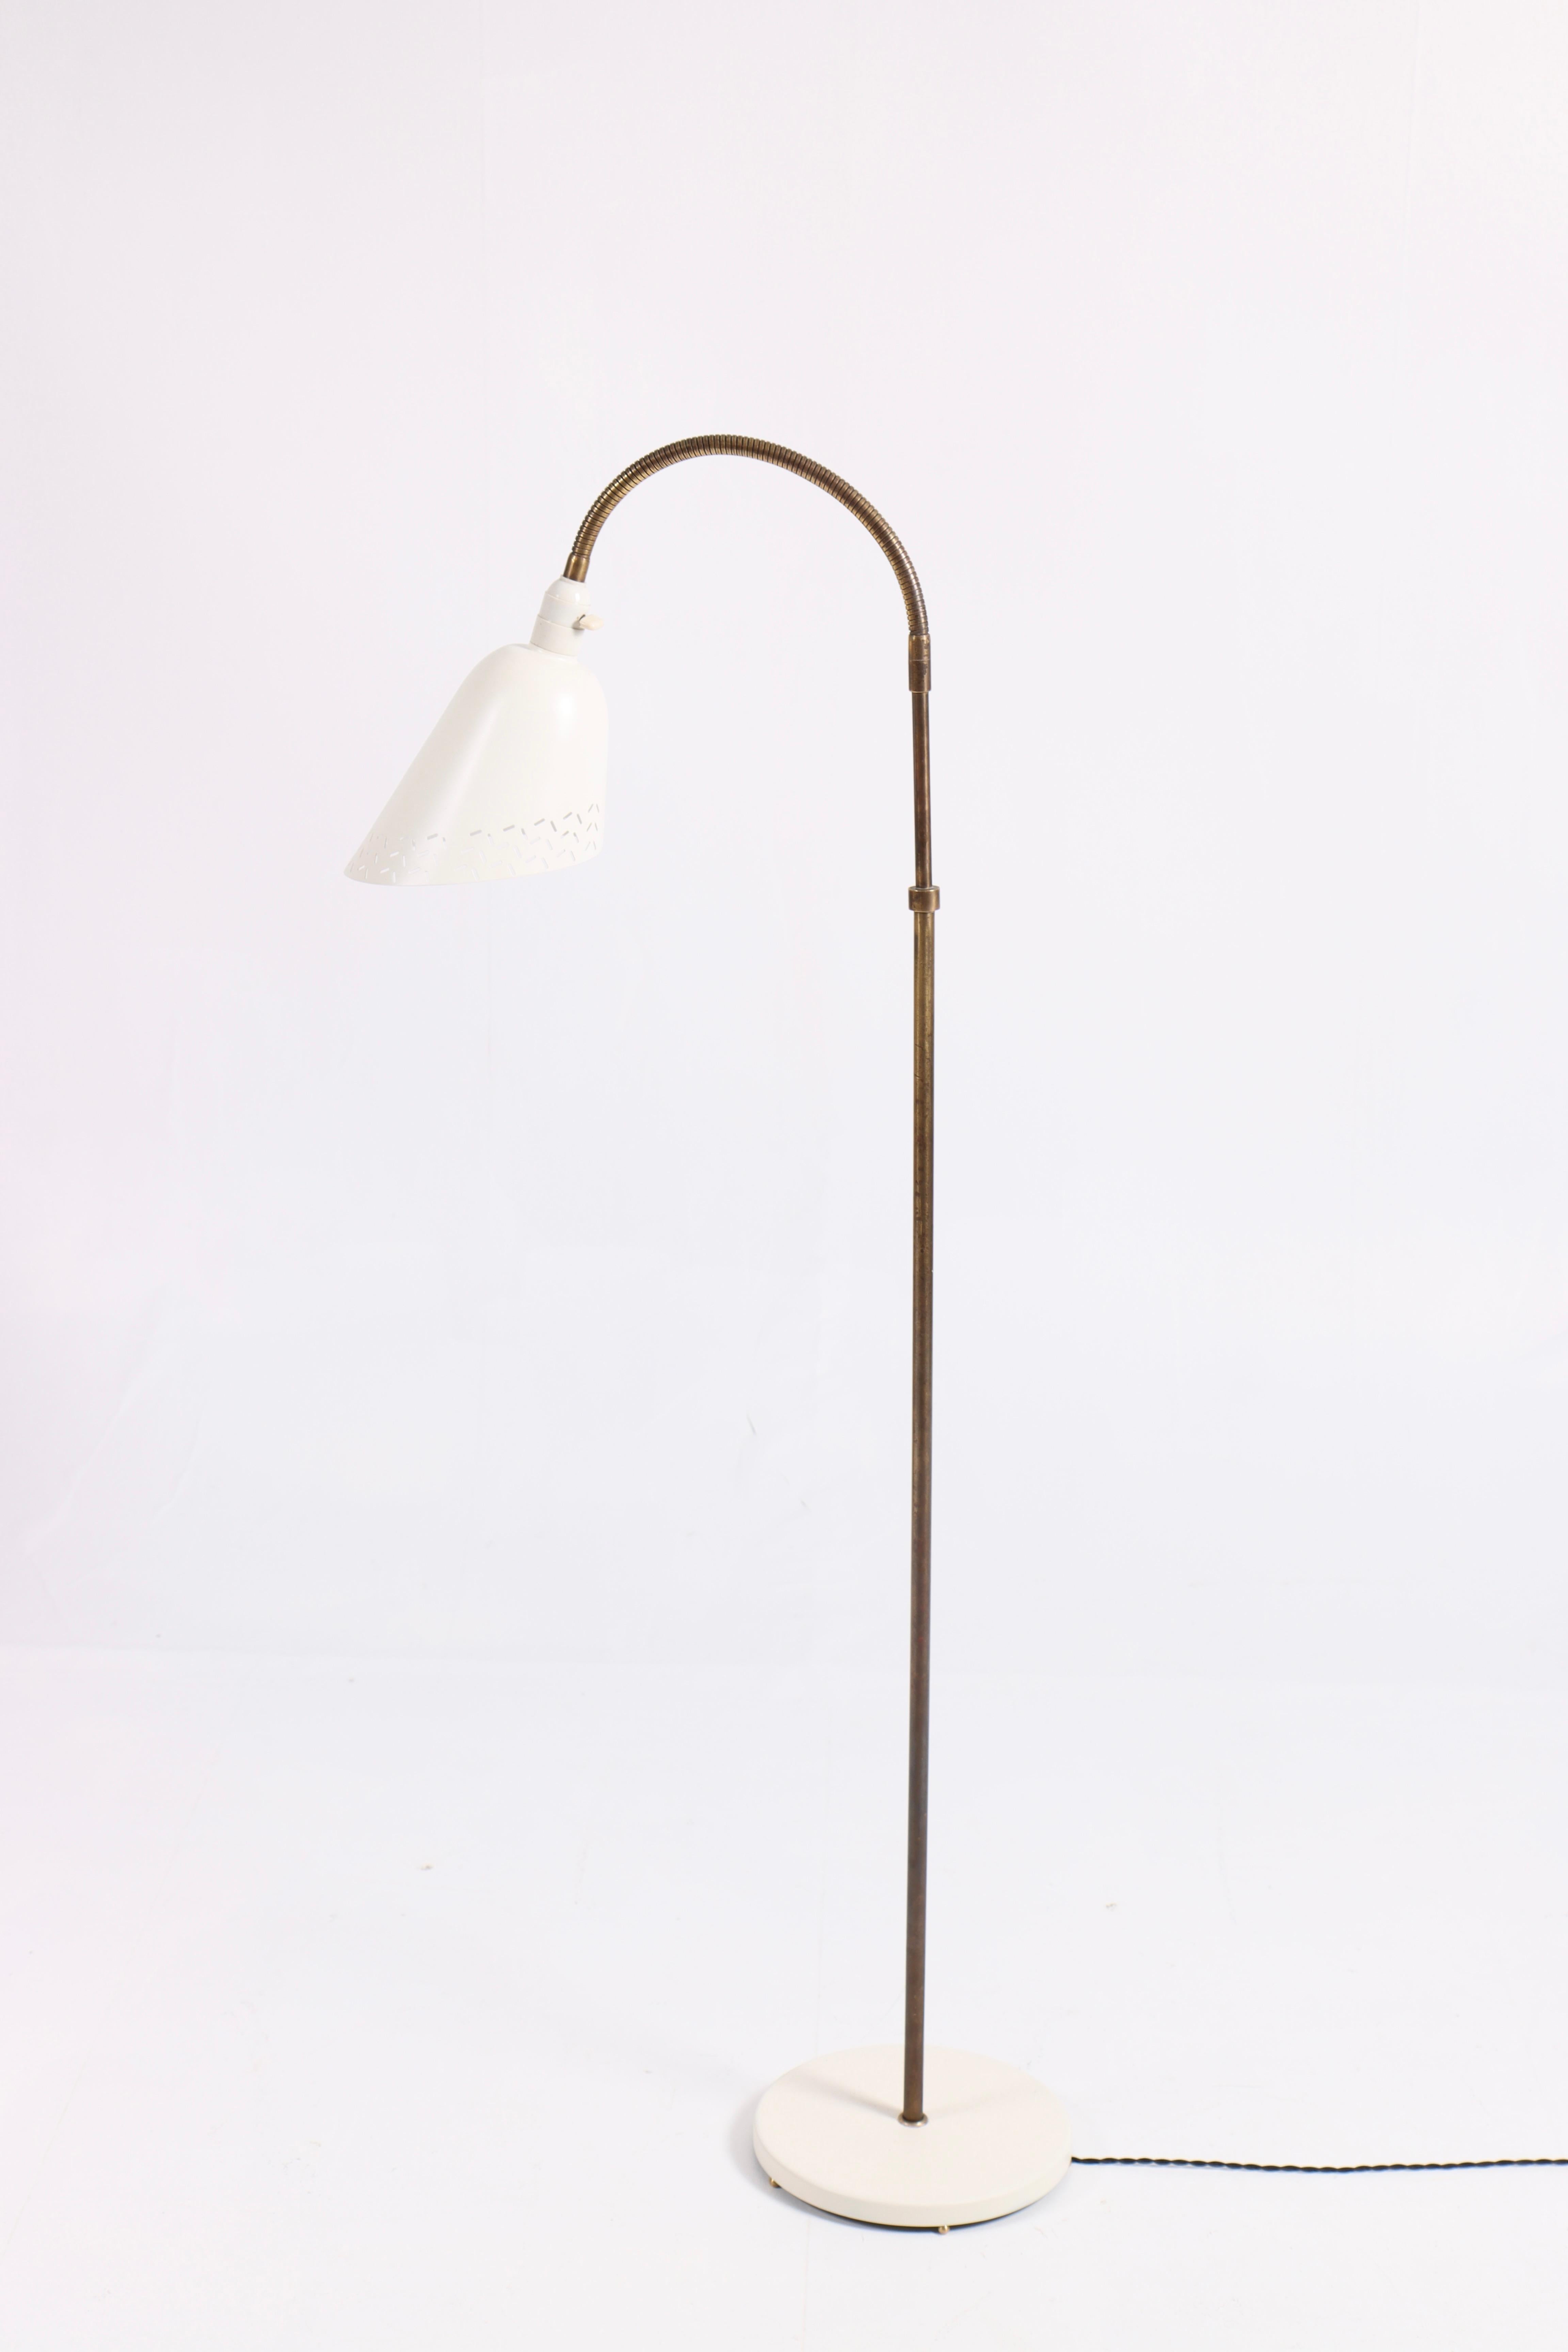 Floor lamp designed by Maa. Arne Jacobsen for the Bellevue in 1929 and made by Louis Poulsen Denmark, original condition.